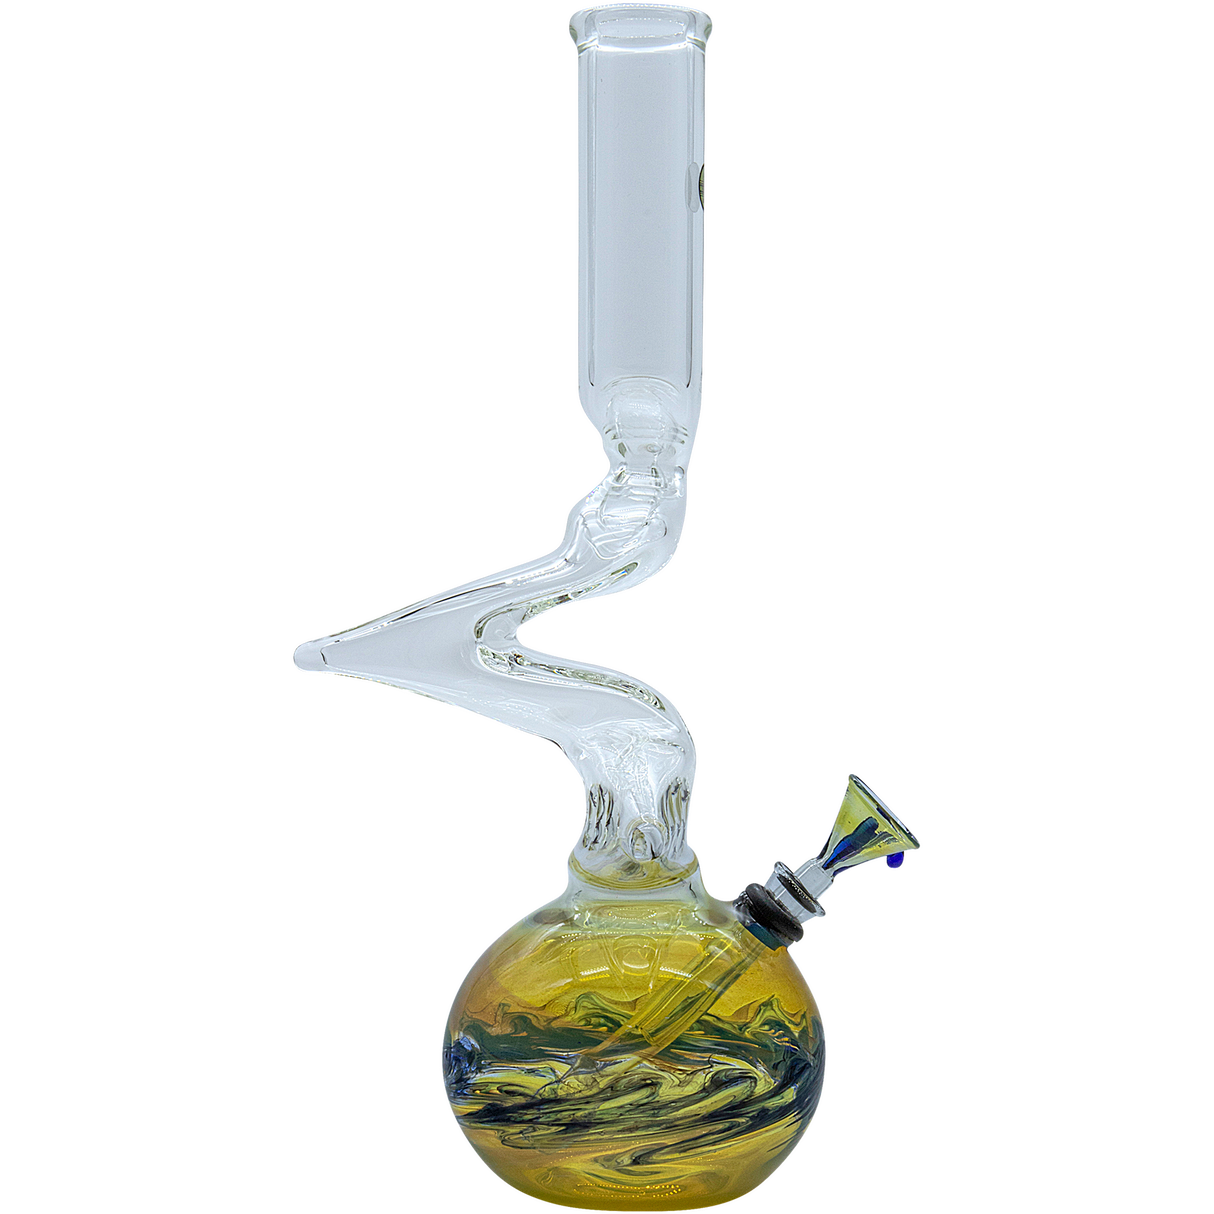 LA Pipes "Switchback" Bubble Base Bong with a Zigzag Neck and Colorful Accents